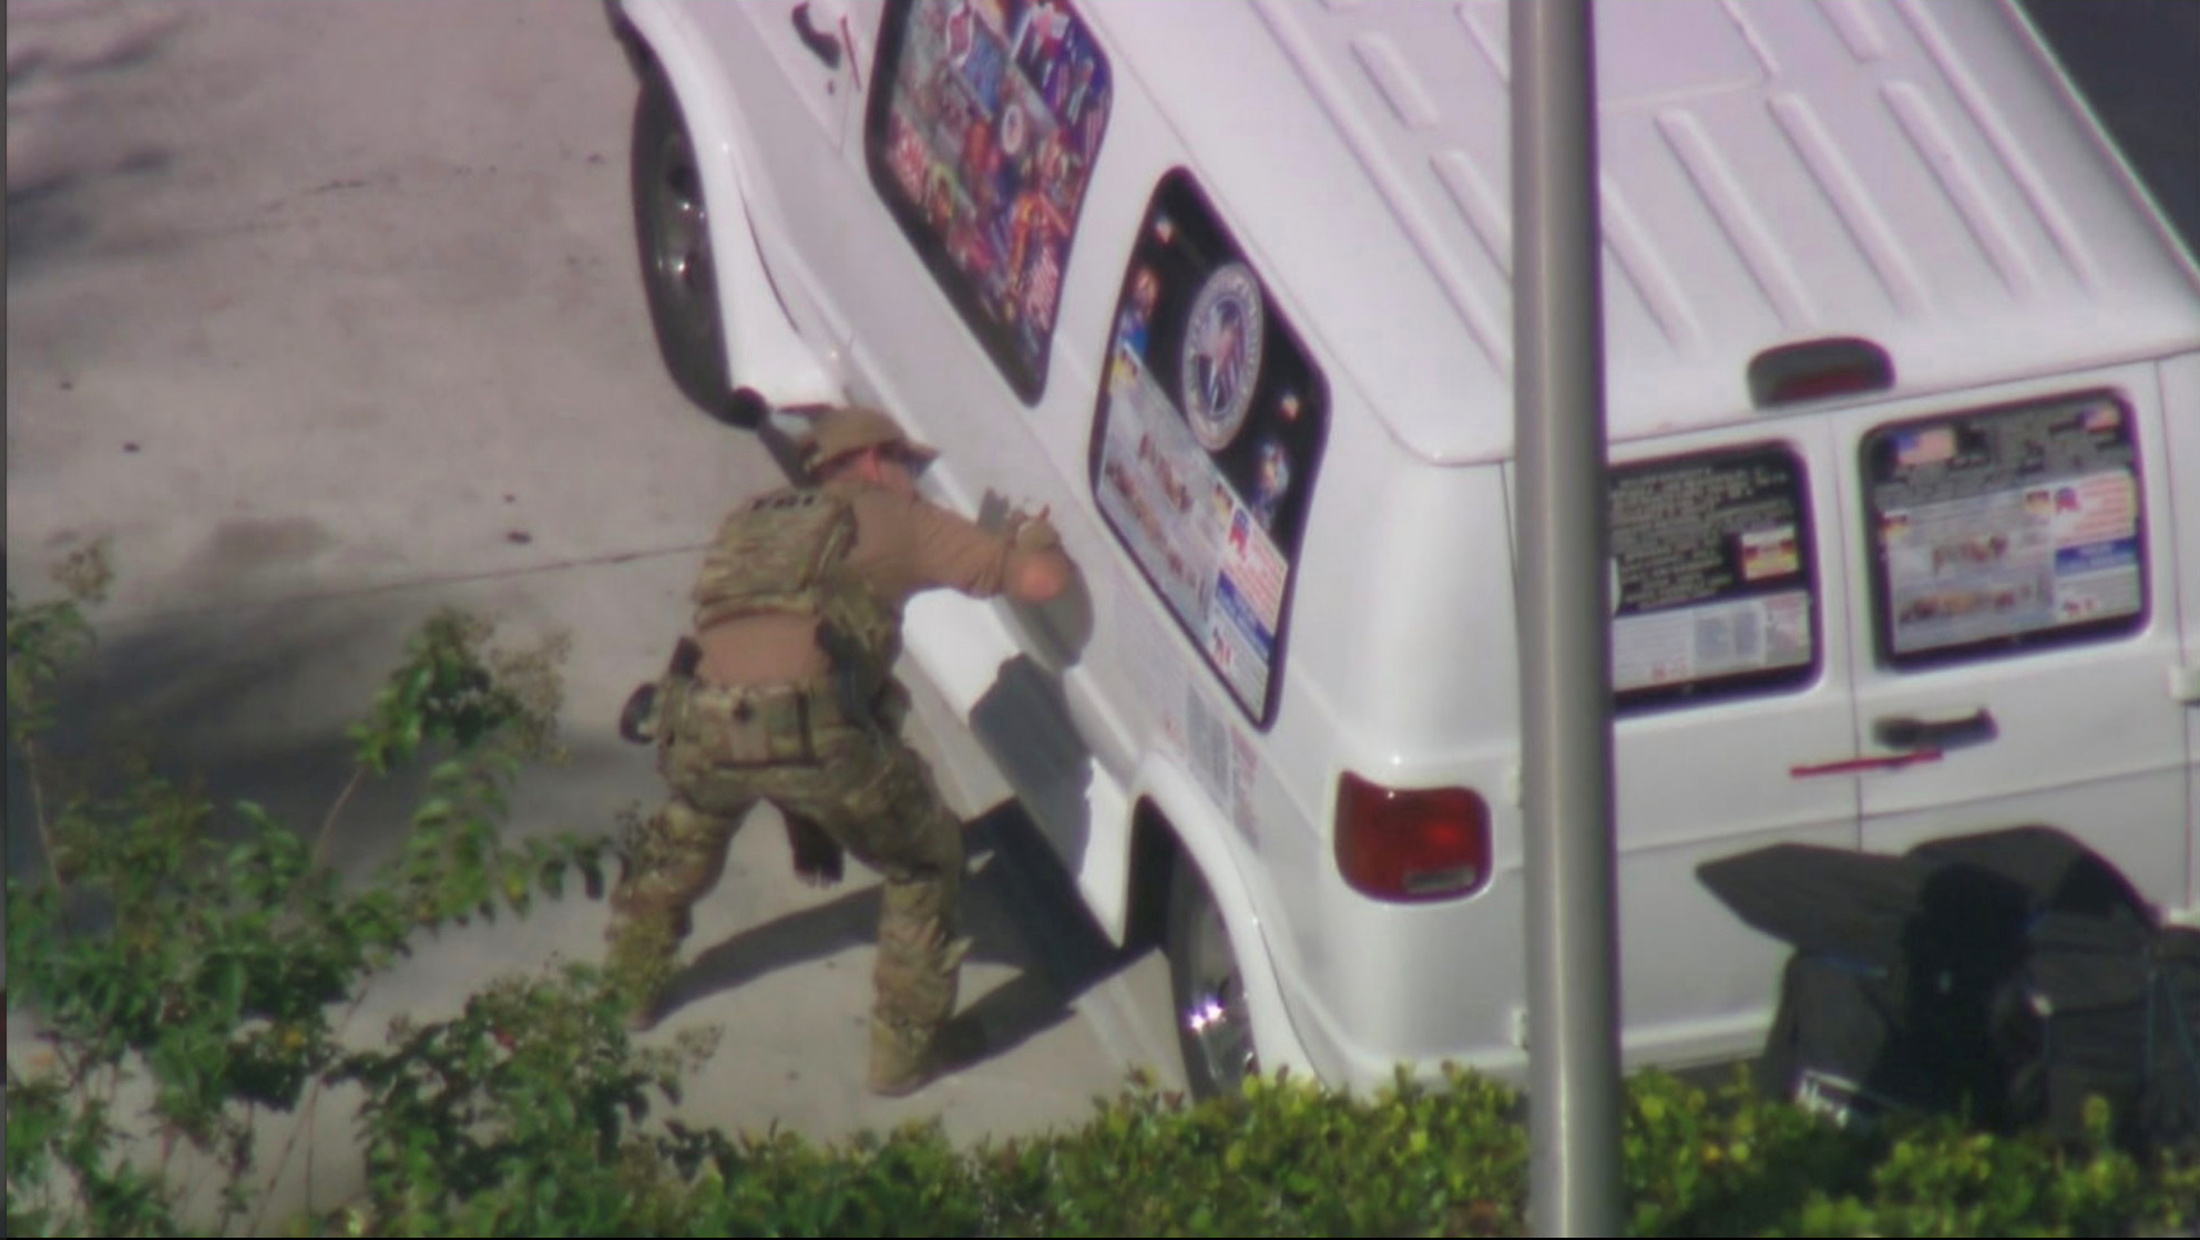 A law enforcement officer checks a van which was seized during an investigation into a series of parcel bombs, in Plantation, Florida October 26, 2018 in a still image fro video. WPLG/Handout via REUTERS